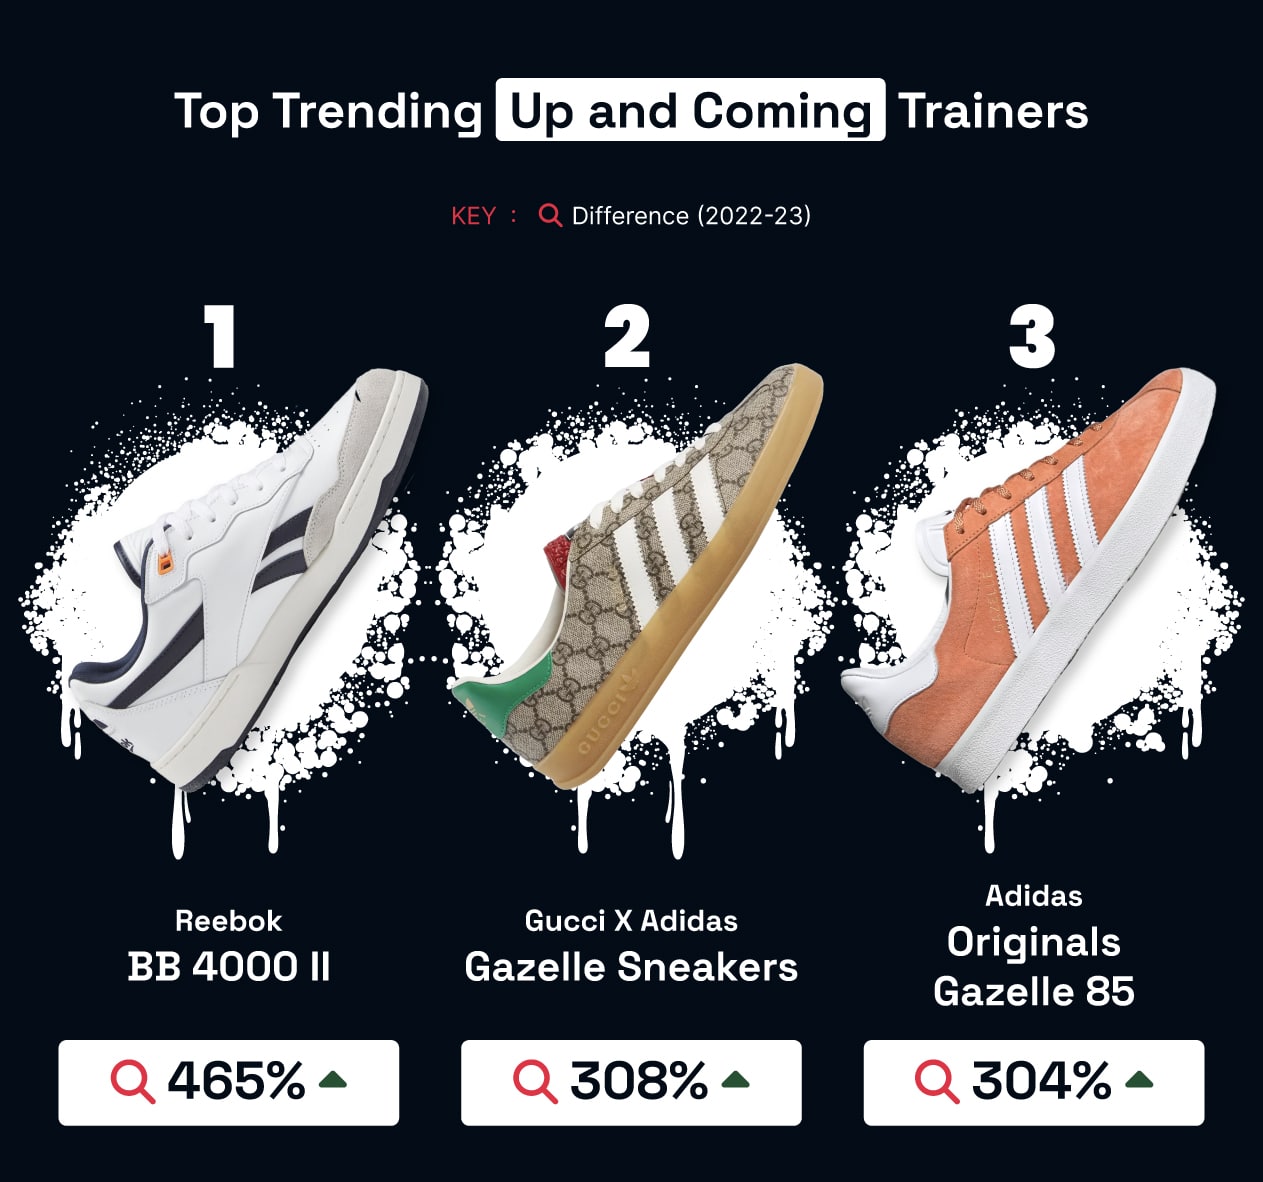 What are the coolest trainers in the world?